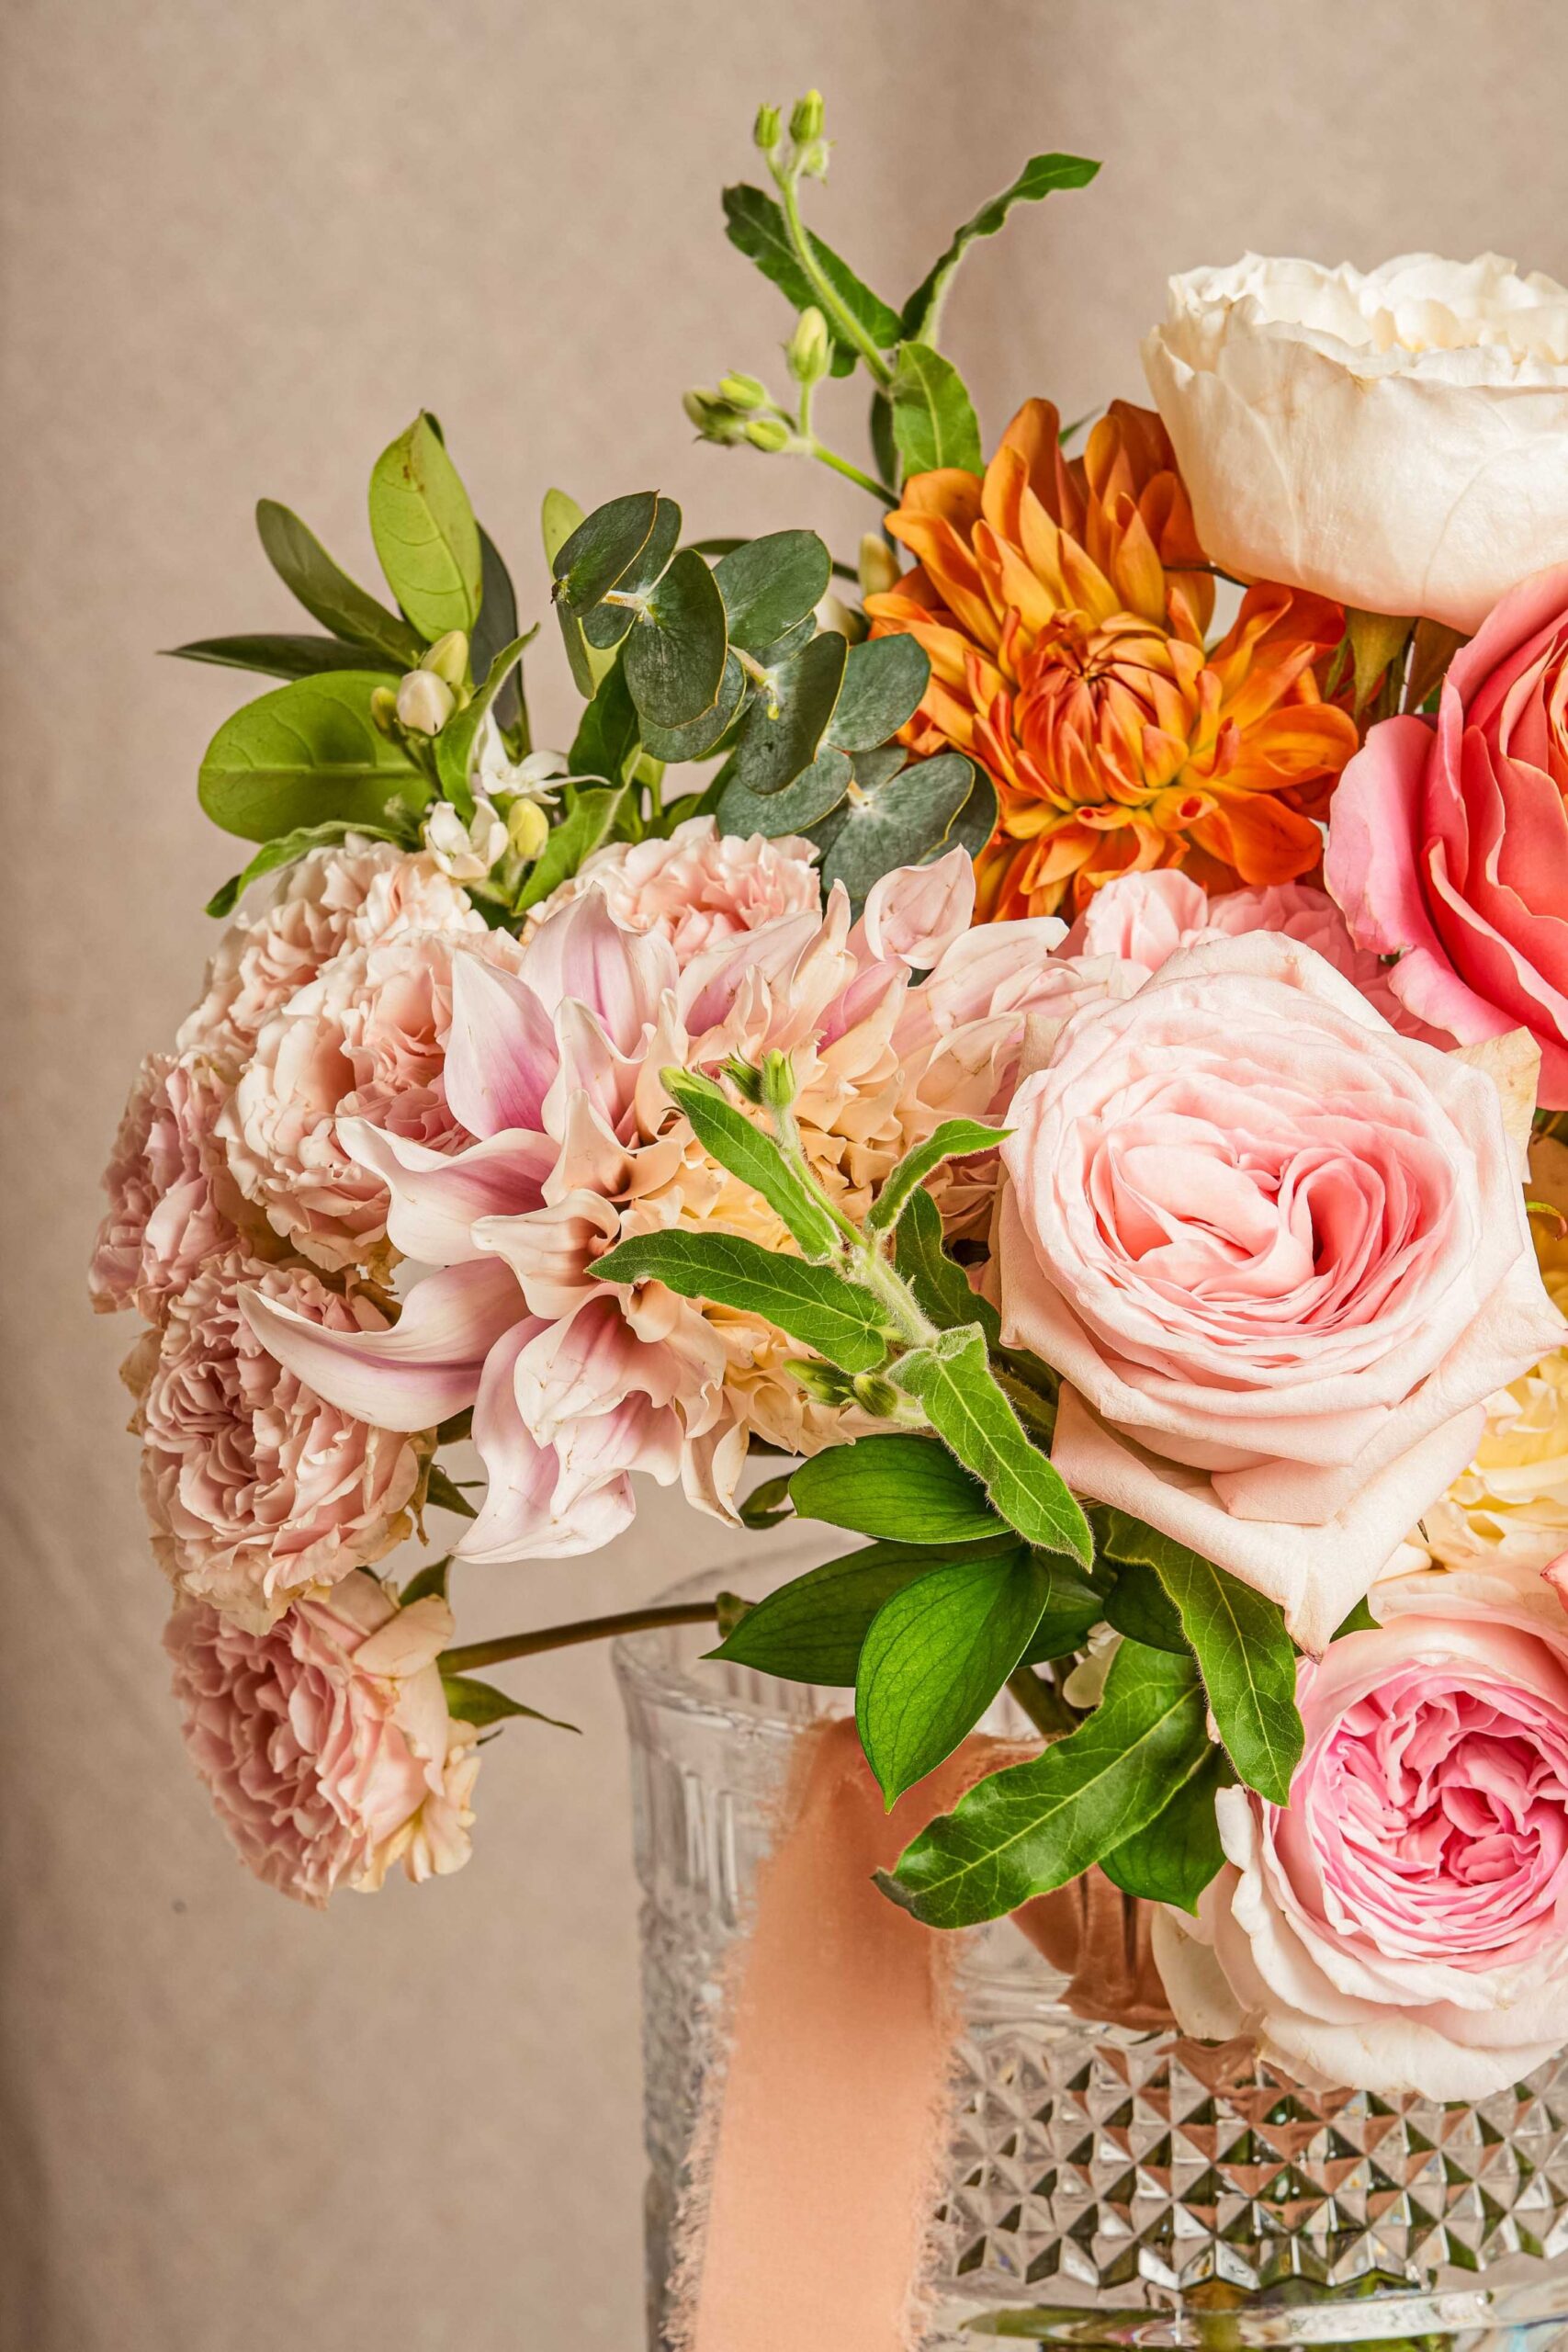 Bouquet of pink roses and orange dahlias